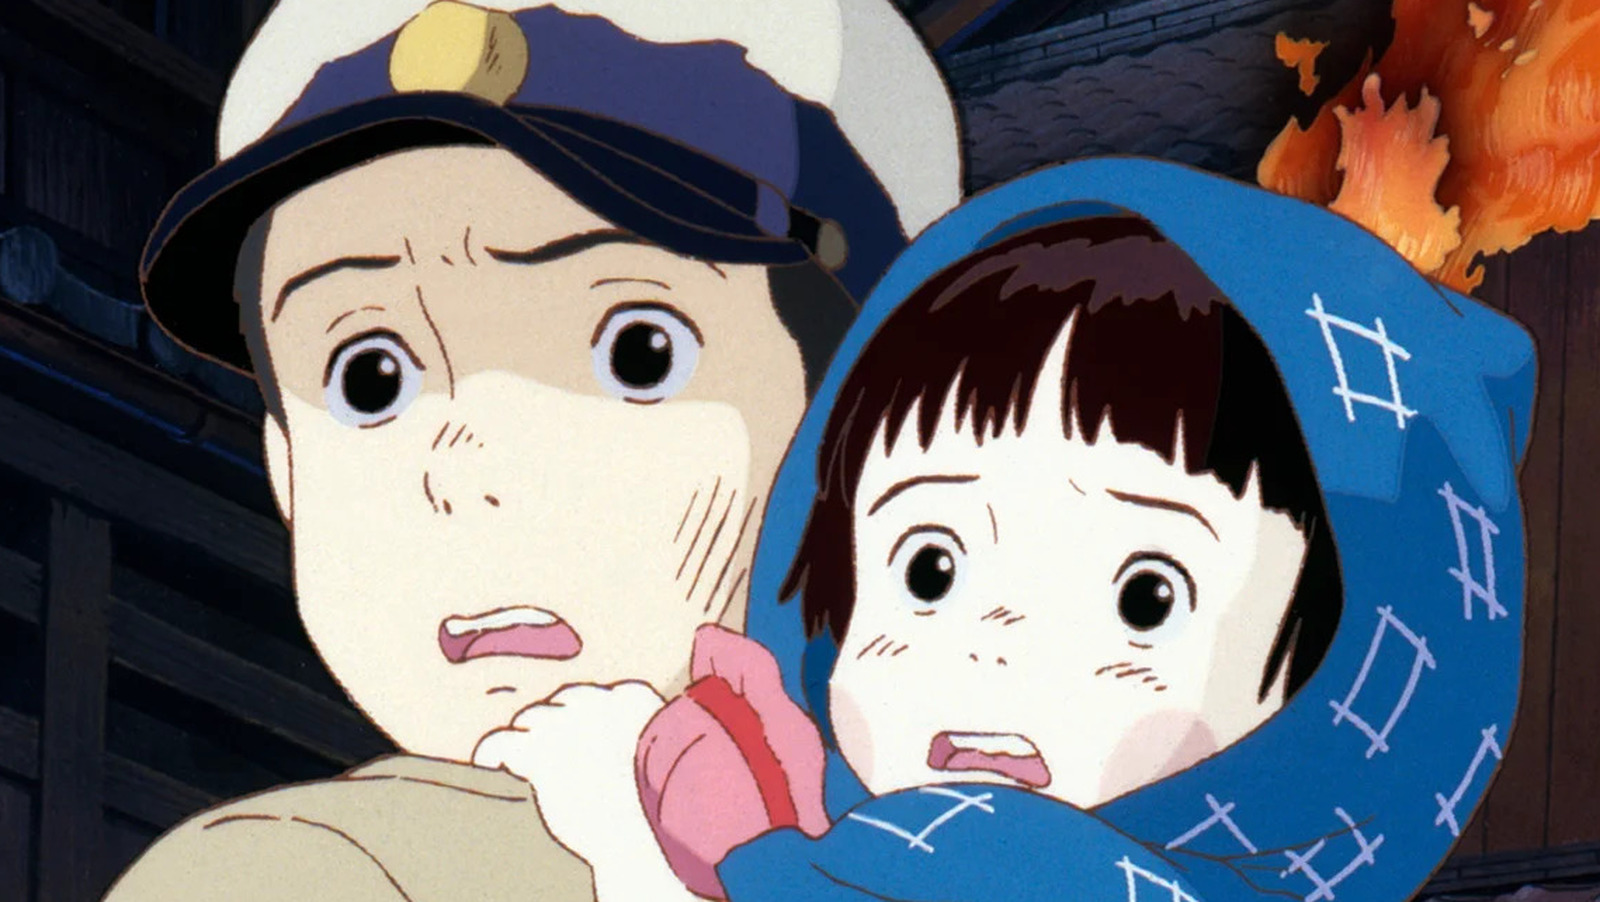 Studio Ghibli fans surprised to find hidden images in Grave of the